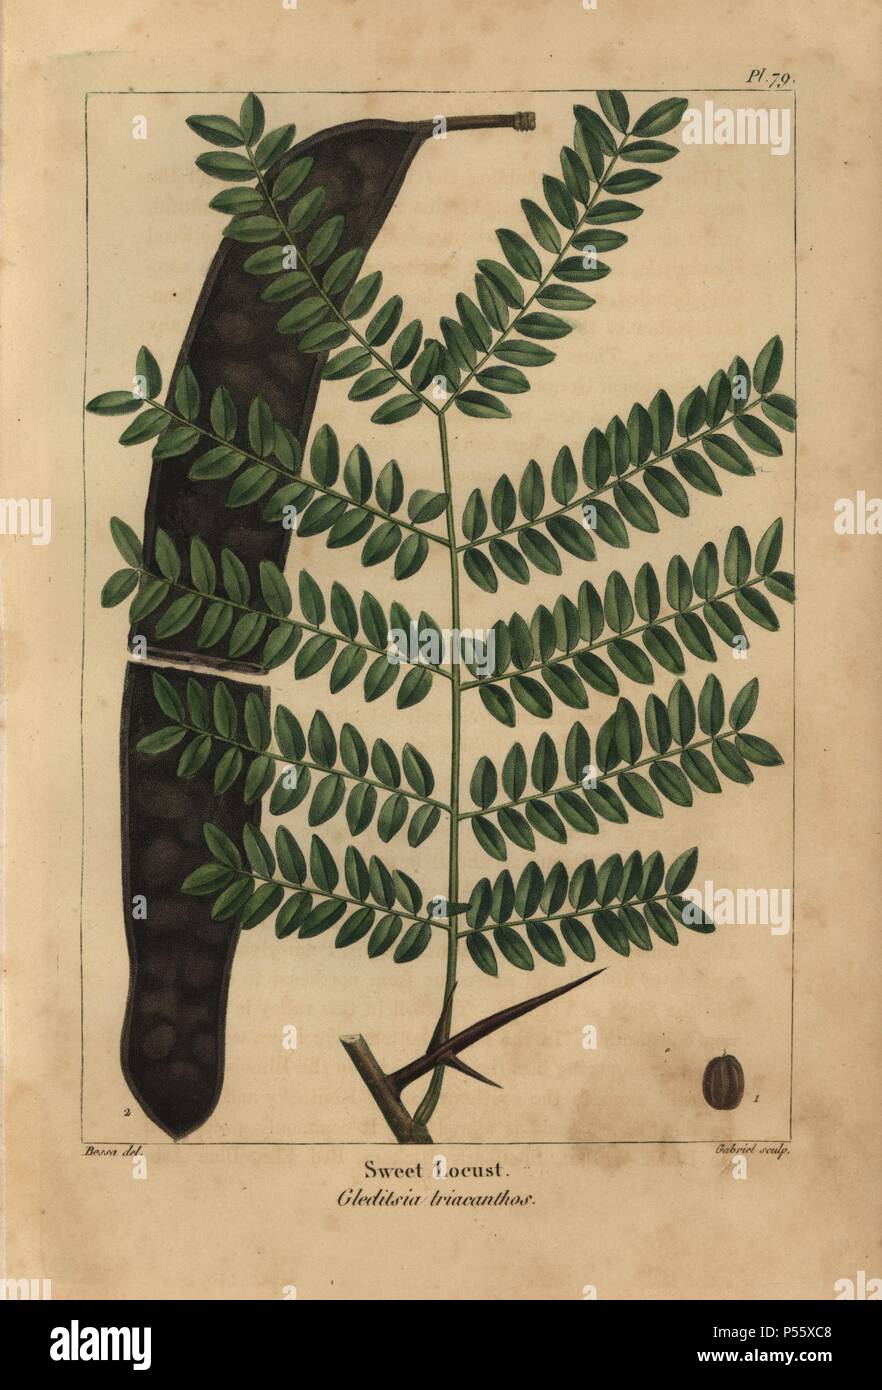 Leaf, pod and seed of the sweet or honey locust tree, Gleditsia triacanthos. Handcolored stipple engraving from a botanical illustration by Pancrace Bessa, engraved on copper by Gabriel, from Francois Andre Michaux's 'North American Sylva,' Philadelphia, 1857. French botanist Michaux (1770-1855) explored America and Canada in 1785 cataloging its native trees. Stock Photo